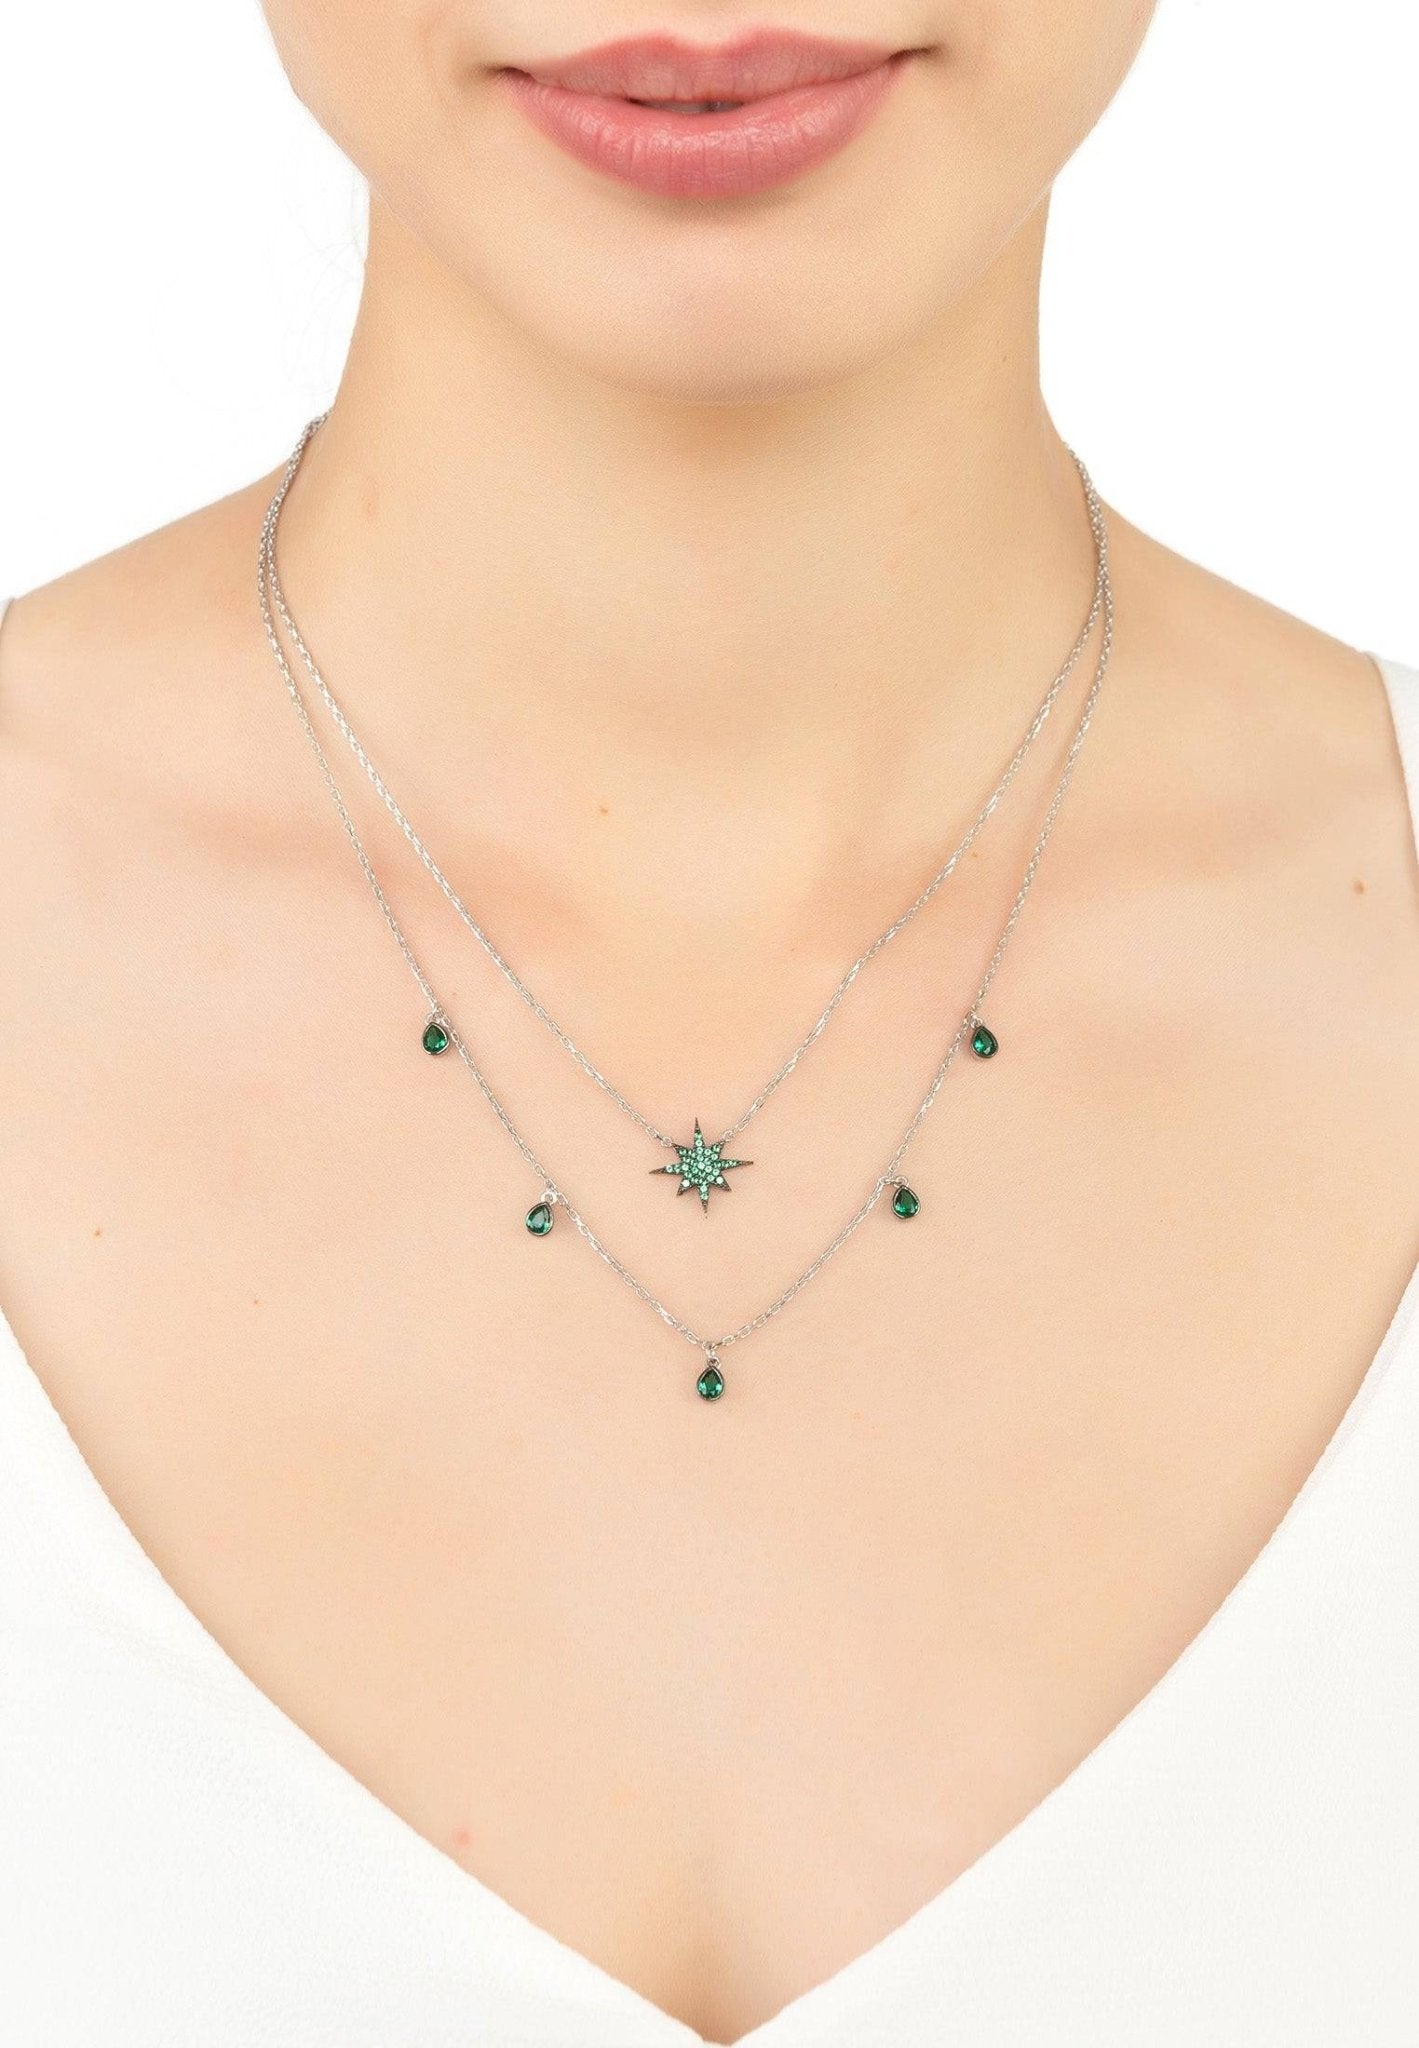 Starburst Double Strand Layered Necklace Silver Emerald Green - LATELITA Necklaces